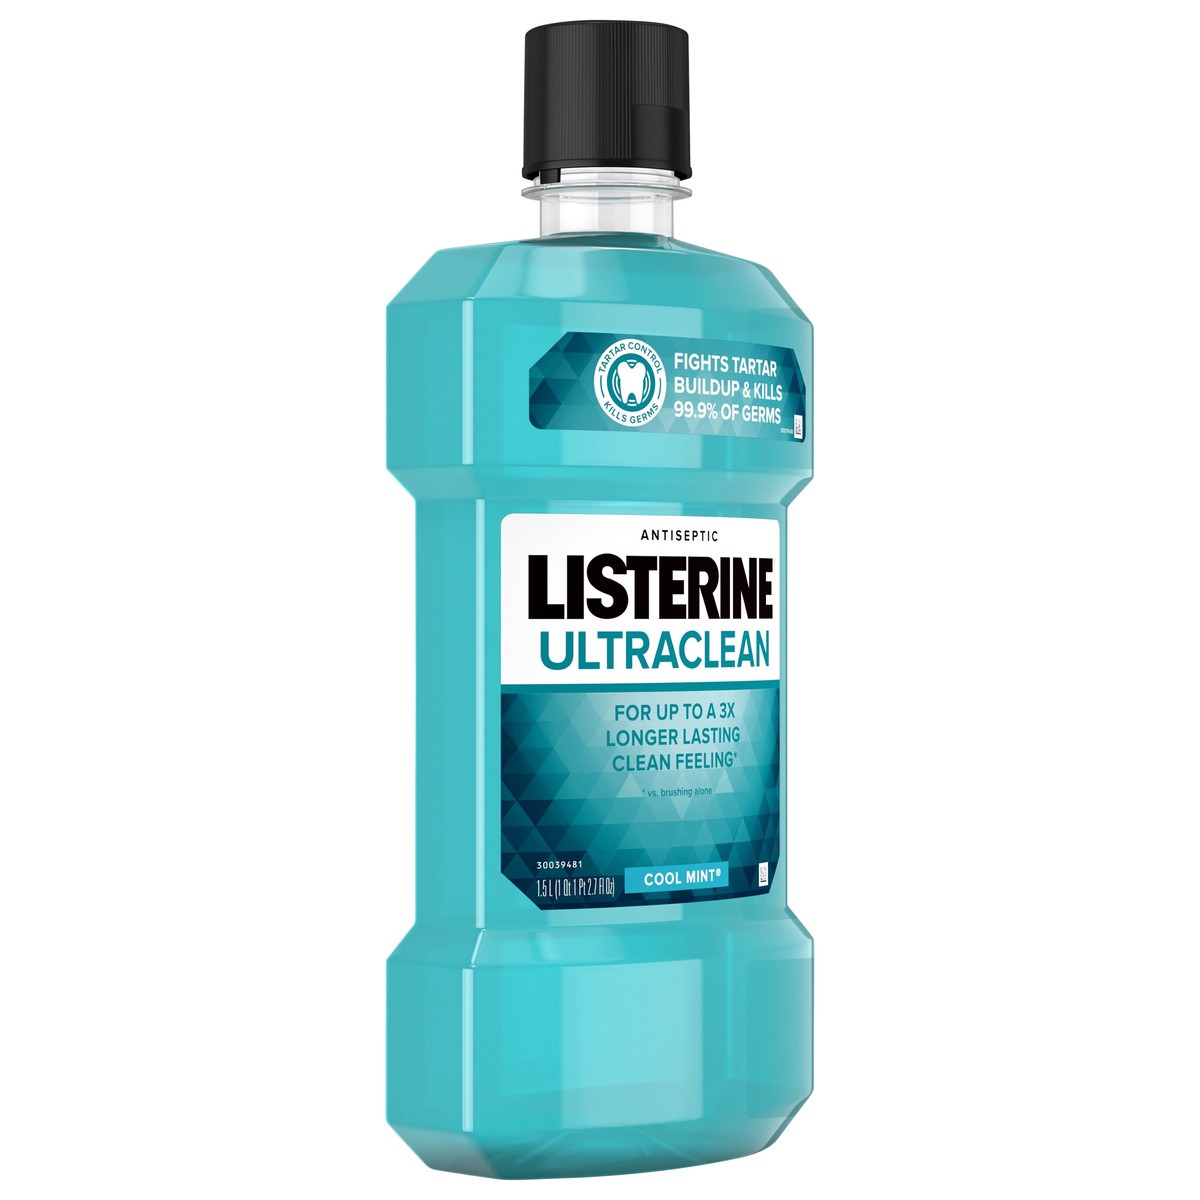 slide 2 of 7, Listerine Ultraclean Oral Care Antiseptic Mouthwash, Everfresh Technology to Help Fight Bad Breath, Gingivitis, Plaque & Tartar, ADA-Accepted Tartar Control Oral Rinse, Cool Mint, 1.5 L, 1.50 liter